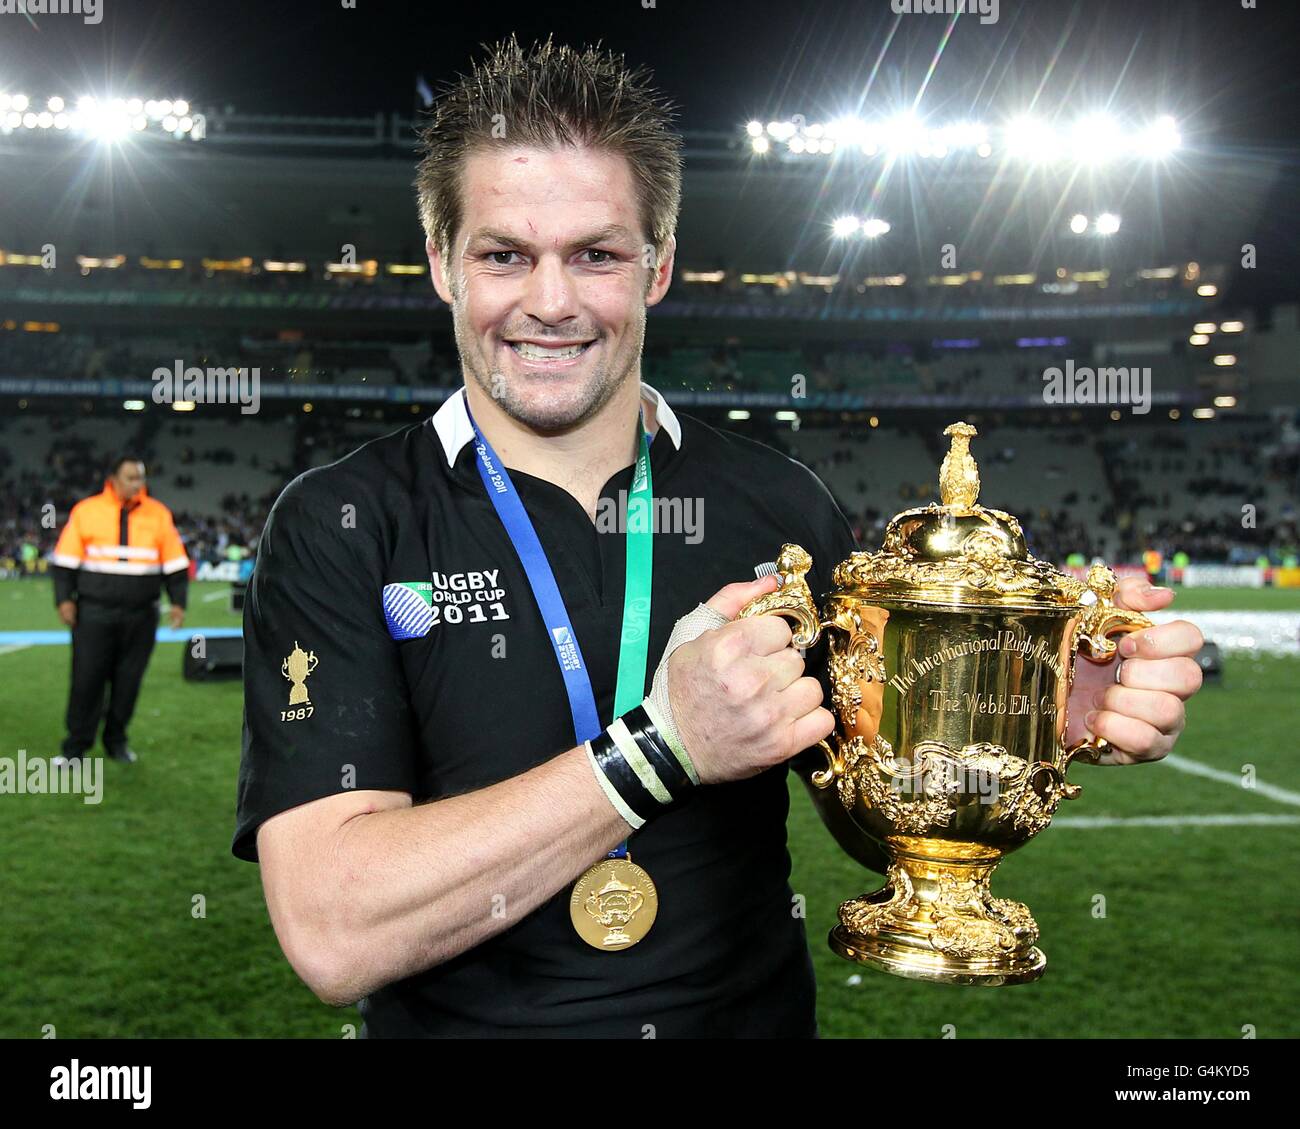 Rugby Union - Rugby World Cup 2011 - Final - France v New Zealand - Eden Park. New Zealand captain Richie McCaw with the Webb Ellis Cup as he celebrates winning the World Cup Final Stock Photo